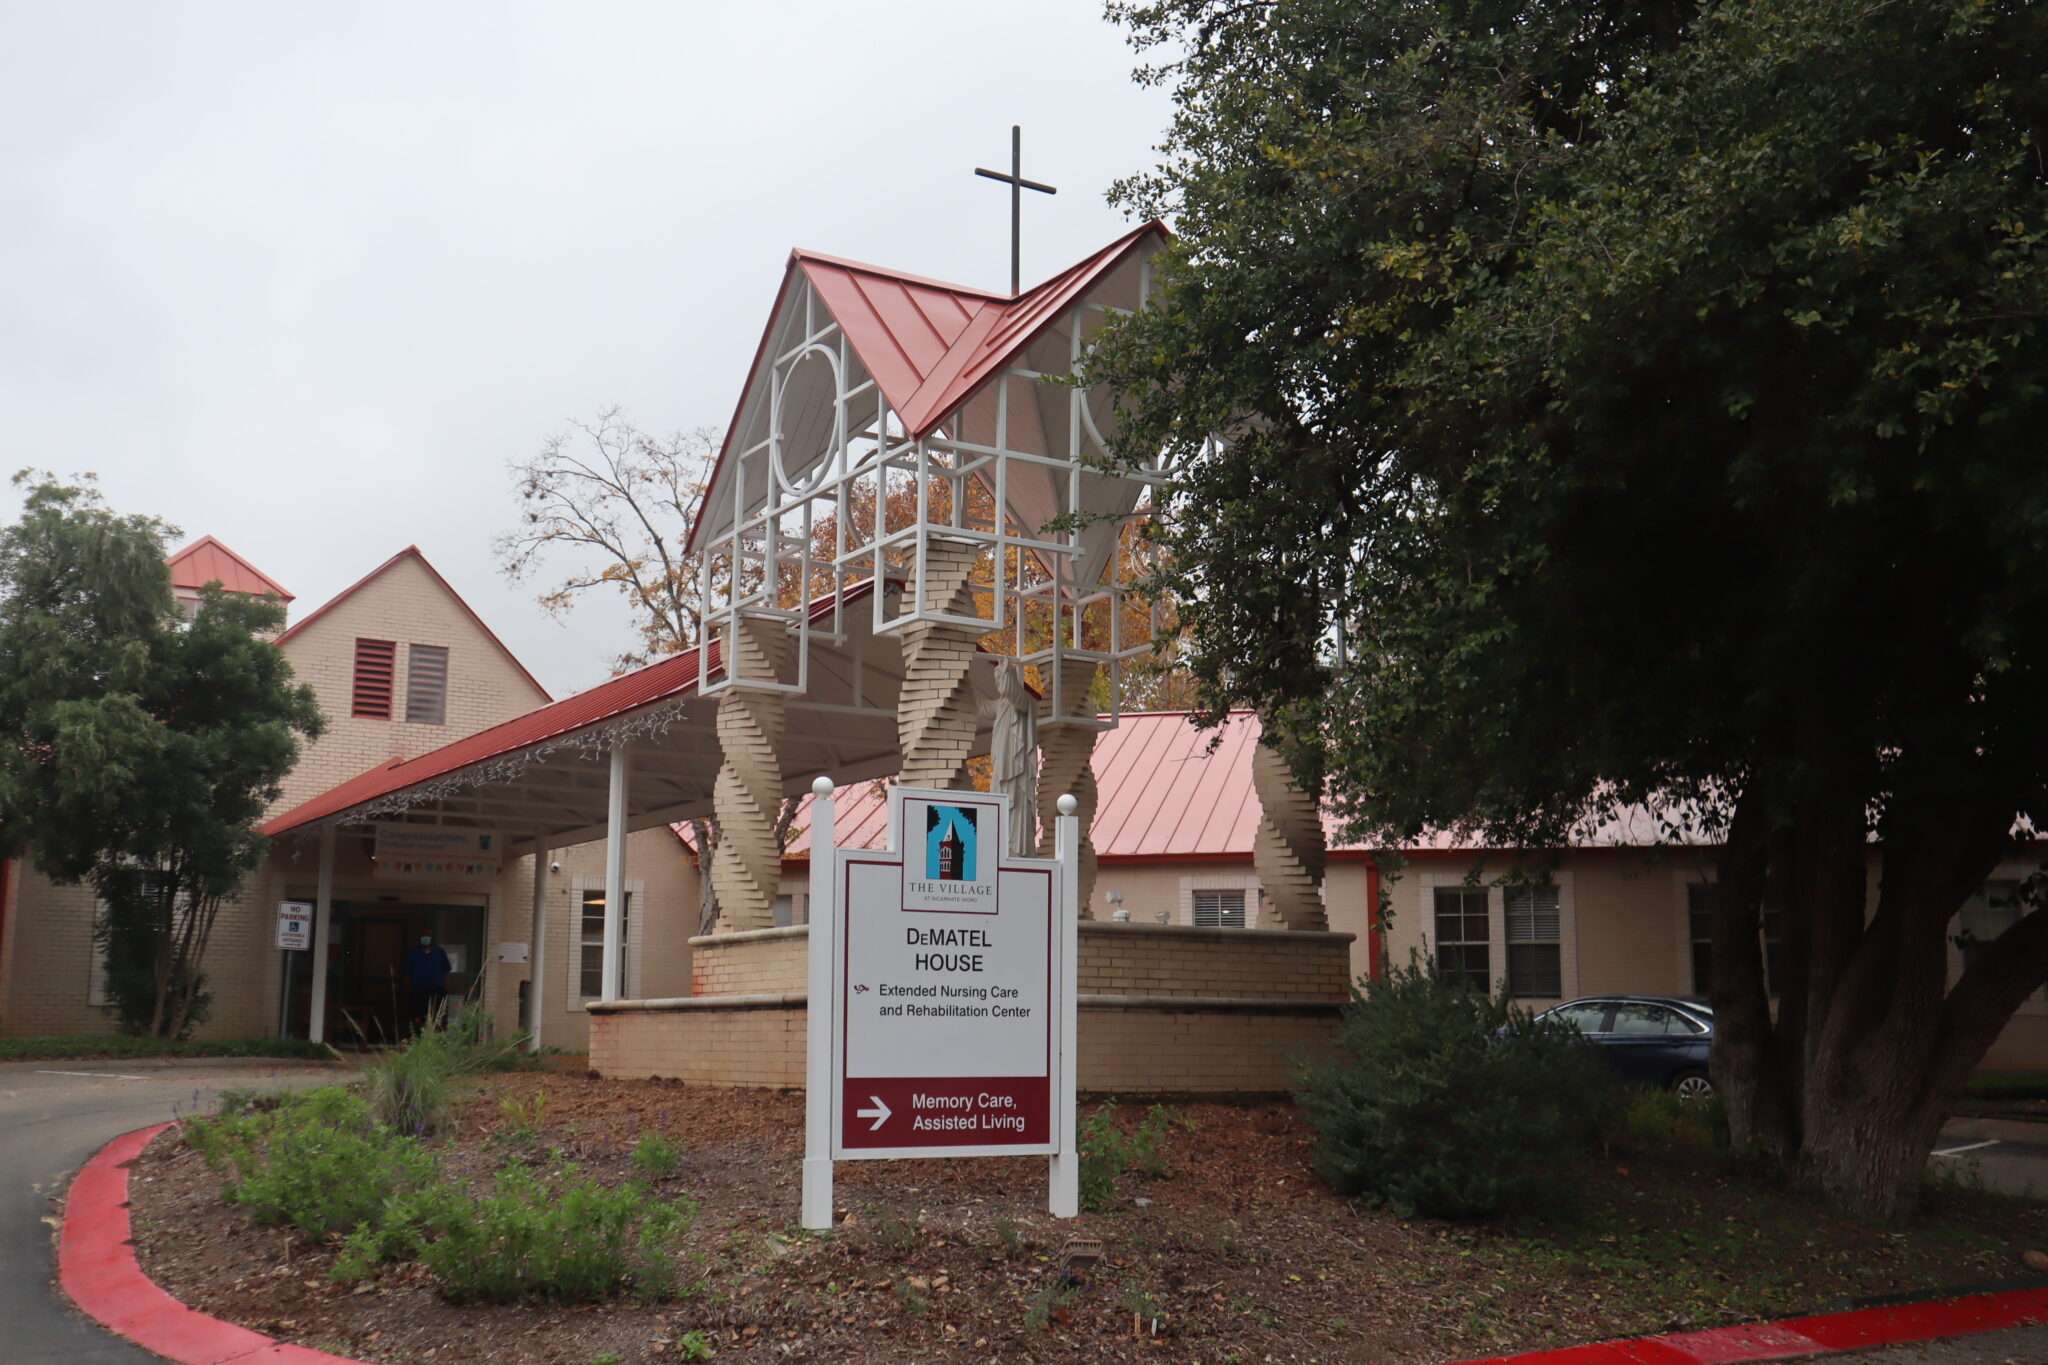 DeMatel House - The Village at Incarnate Word image